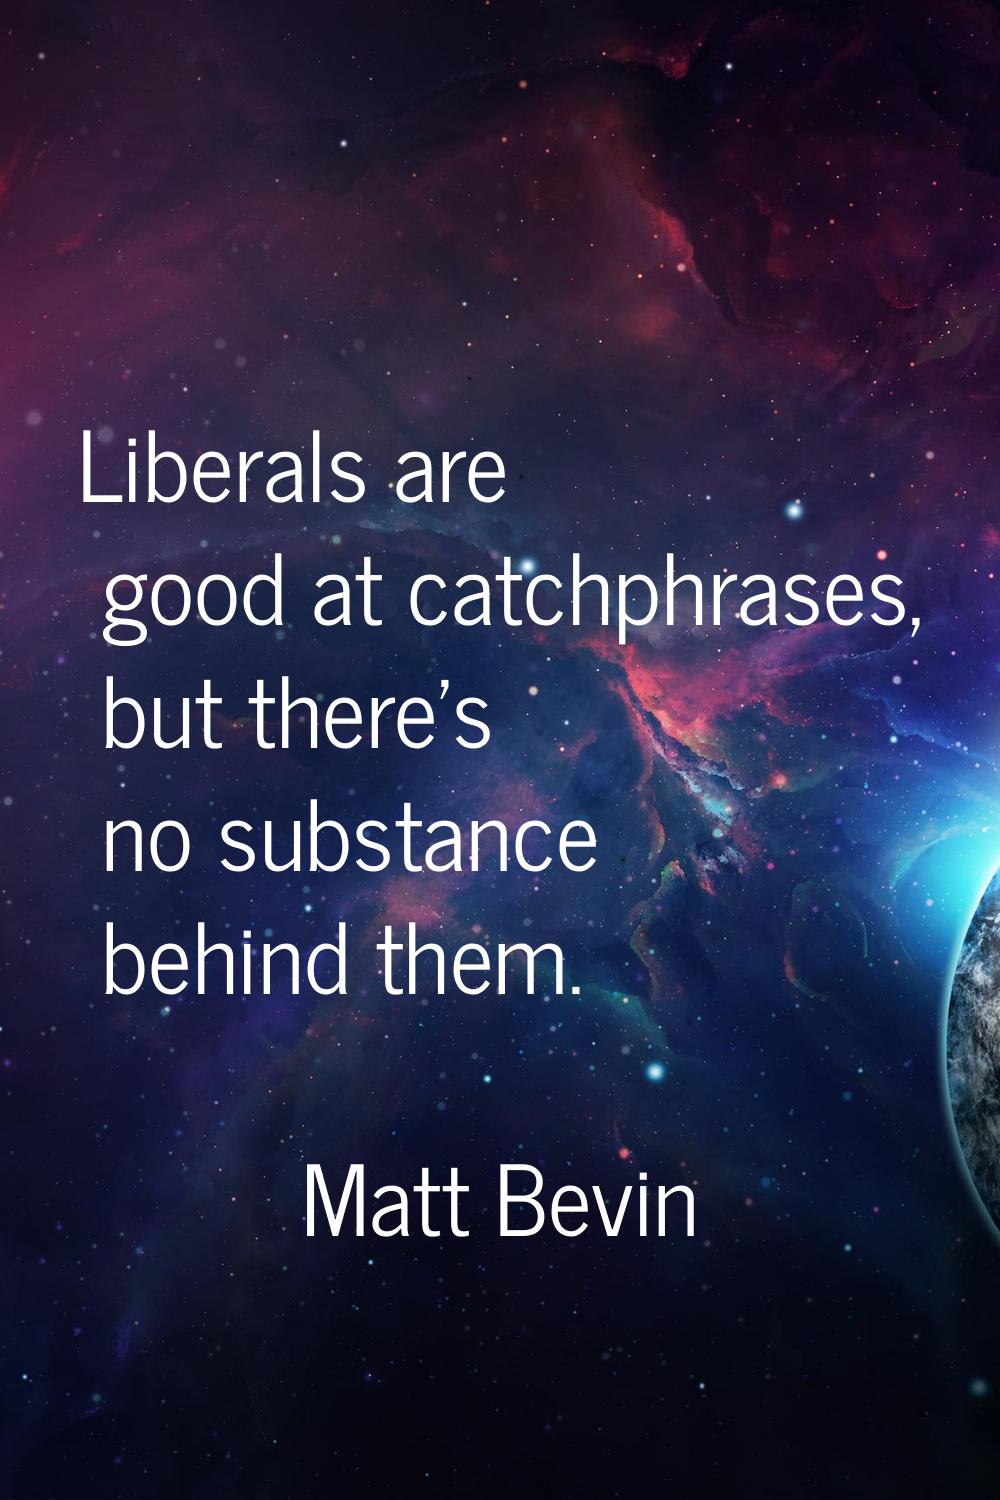 Liberals are good at catchphrases, but there's no substance behind them.